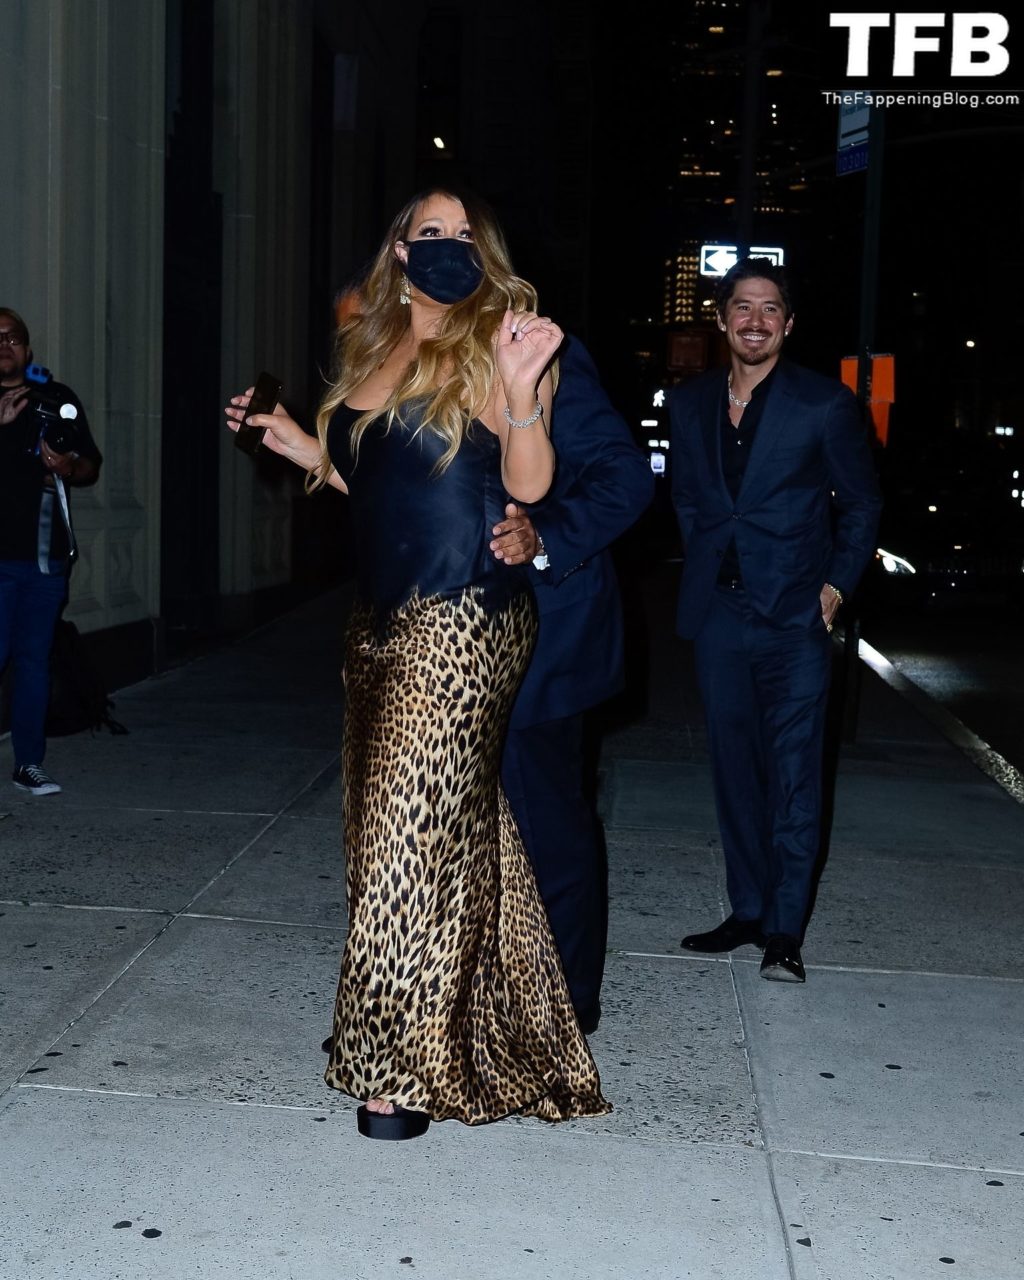 Mariah Carey Celebrates Being Inducted Into the Songwriter’s Hall of Fame with Brian Tanaka (32 Photos)